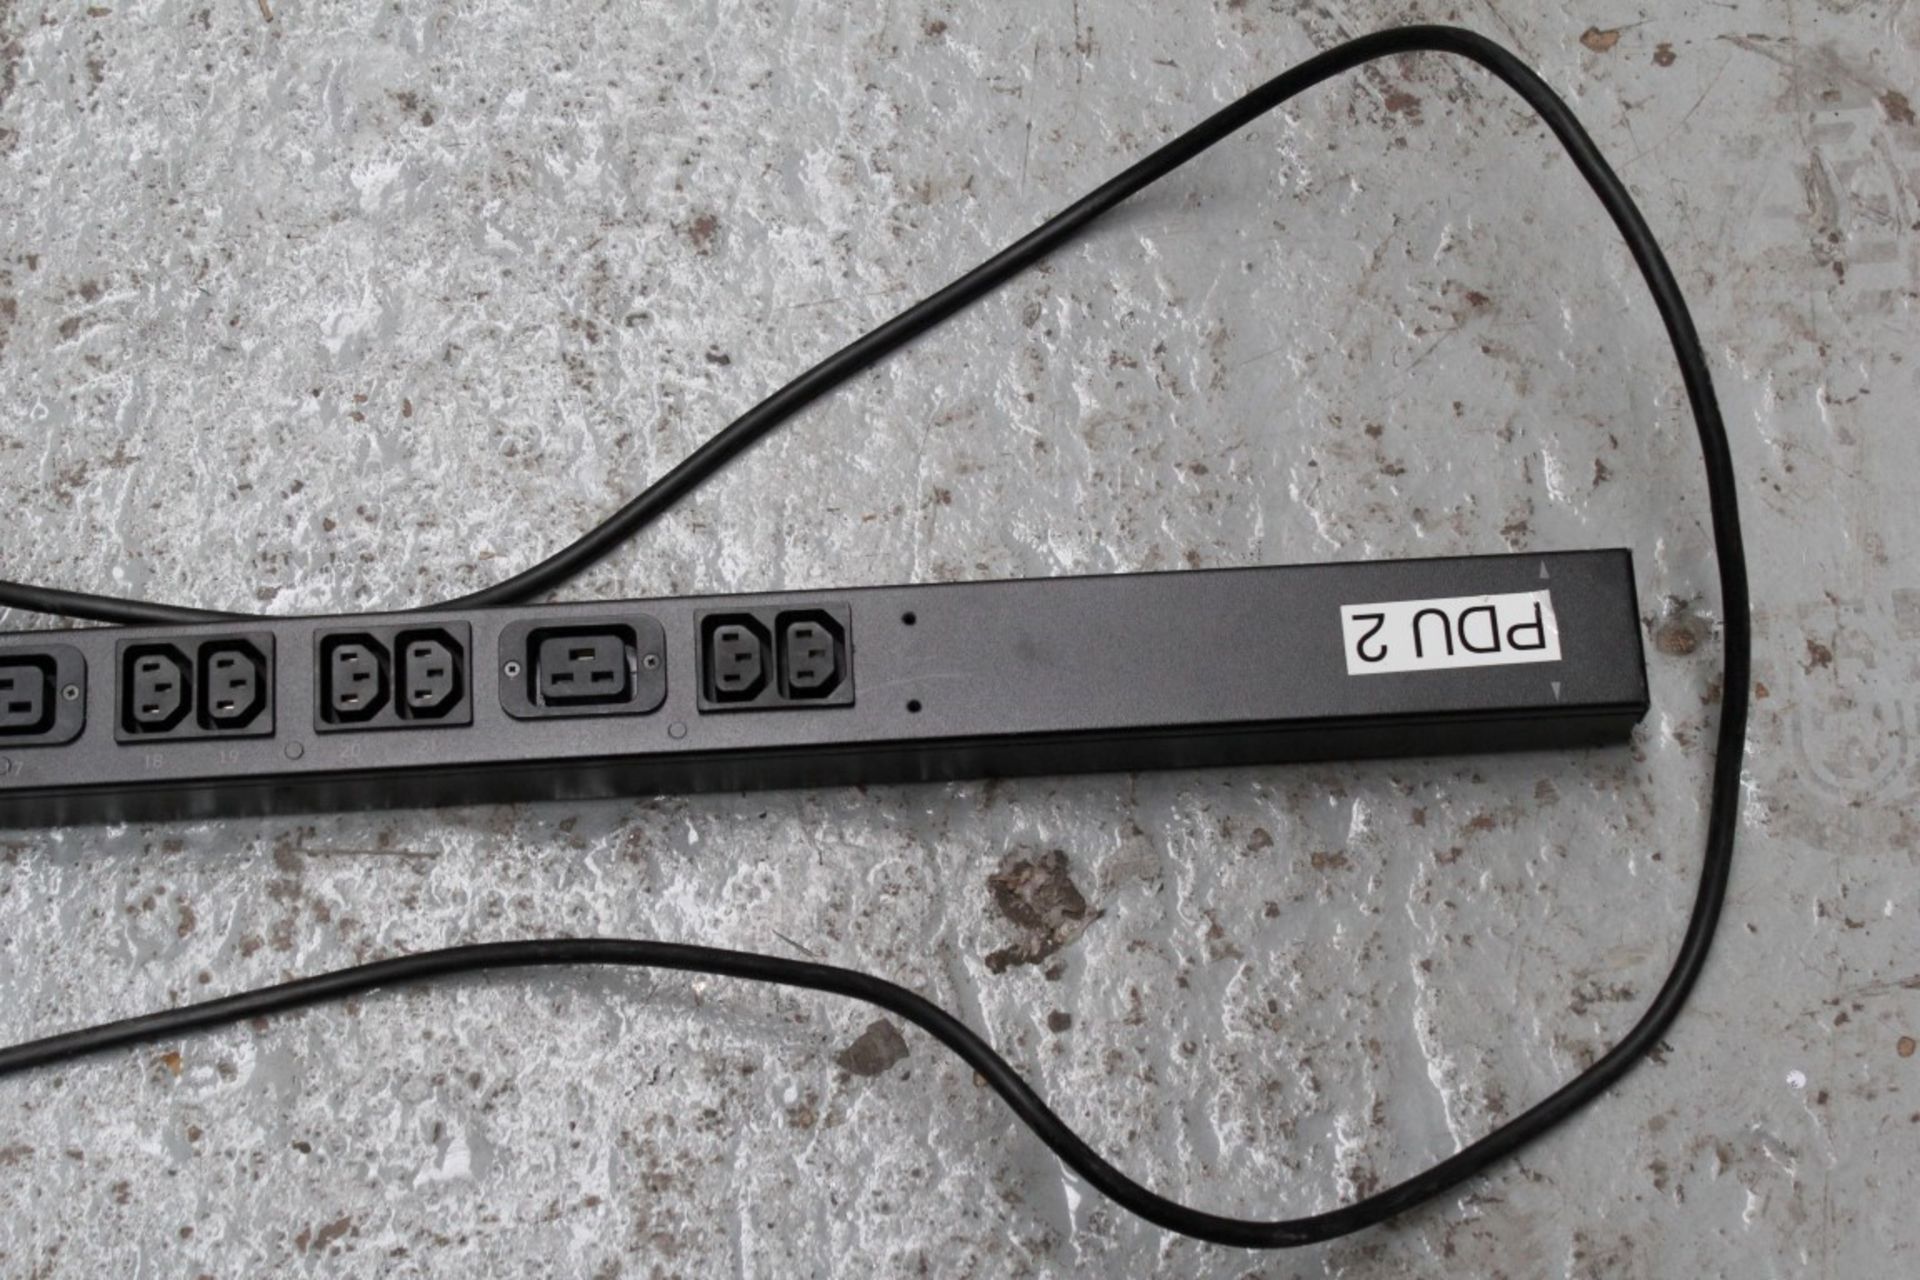 1 x APC Metered Rack PDU - Model AP7852 - 230V 16A - Features 24 Output Connectors - CL106 - Removed - Image 2 of 4